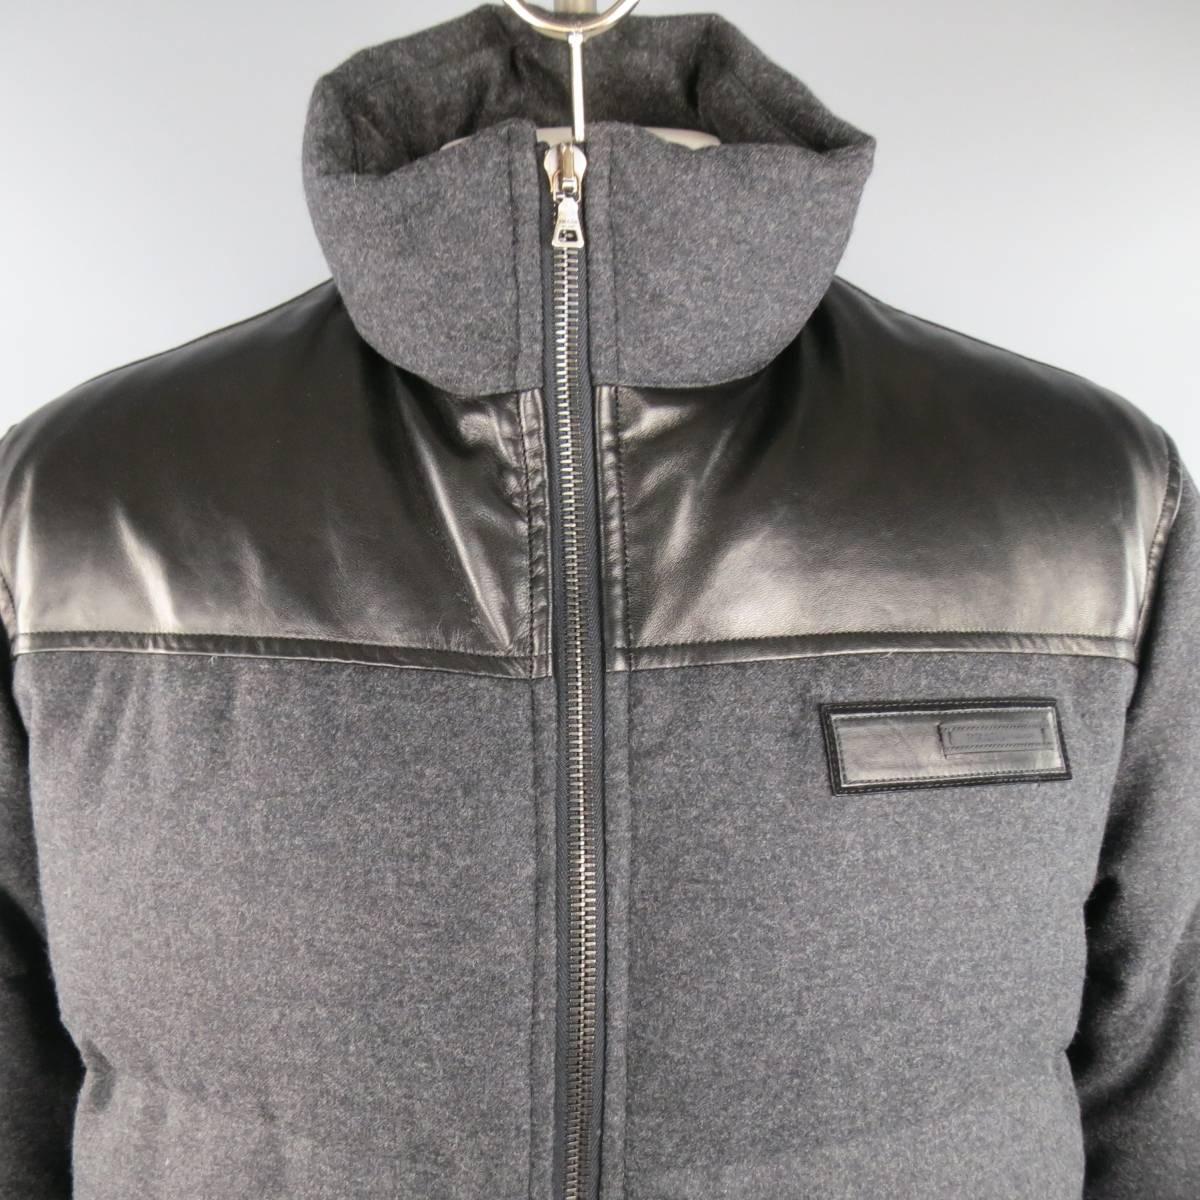 PRADA puffer coat in a charcoal gray quilted down filled wool featuring a black leather top panel, high collar with optional hood, snap pockets, and leather logo patch. Made in Italy.
 
Excellent Pre-Owned Condition.
Marked: XL
 
Measurements:
